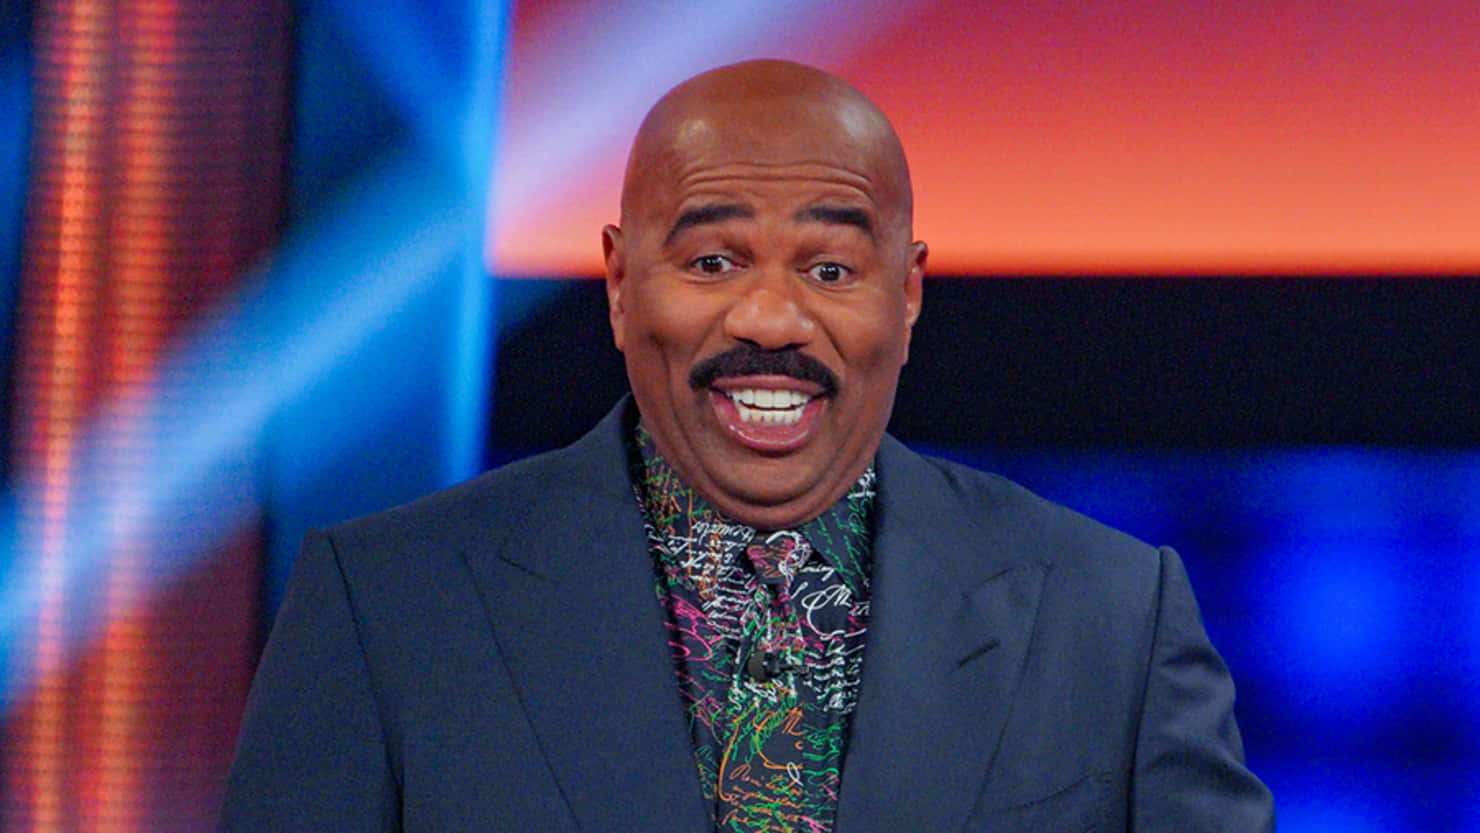 Steve Harvey Smiling In A Colorful Shirt Background